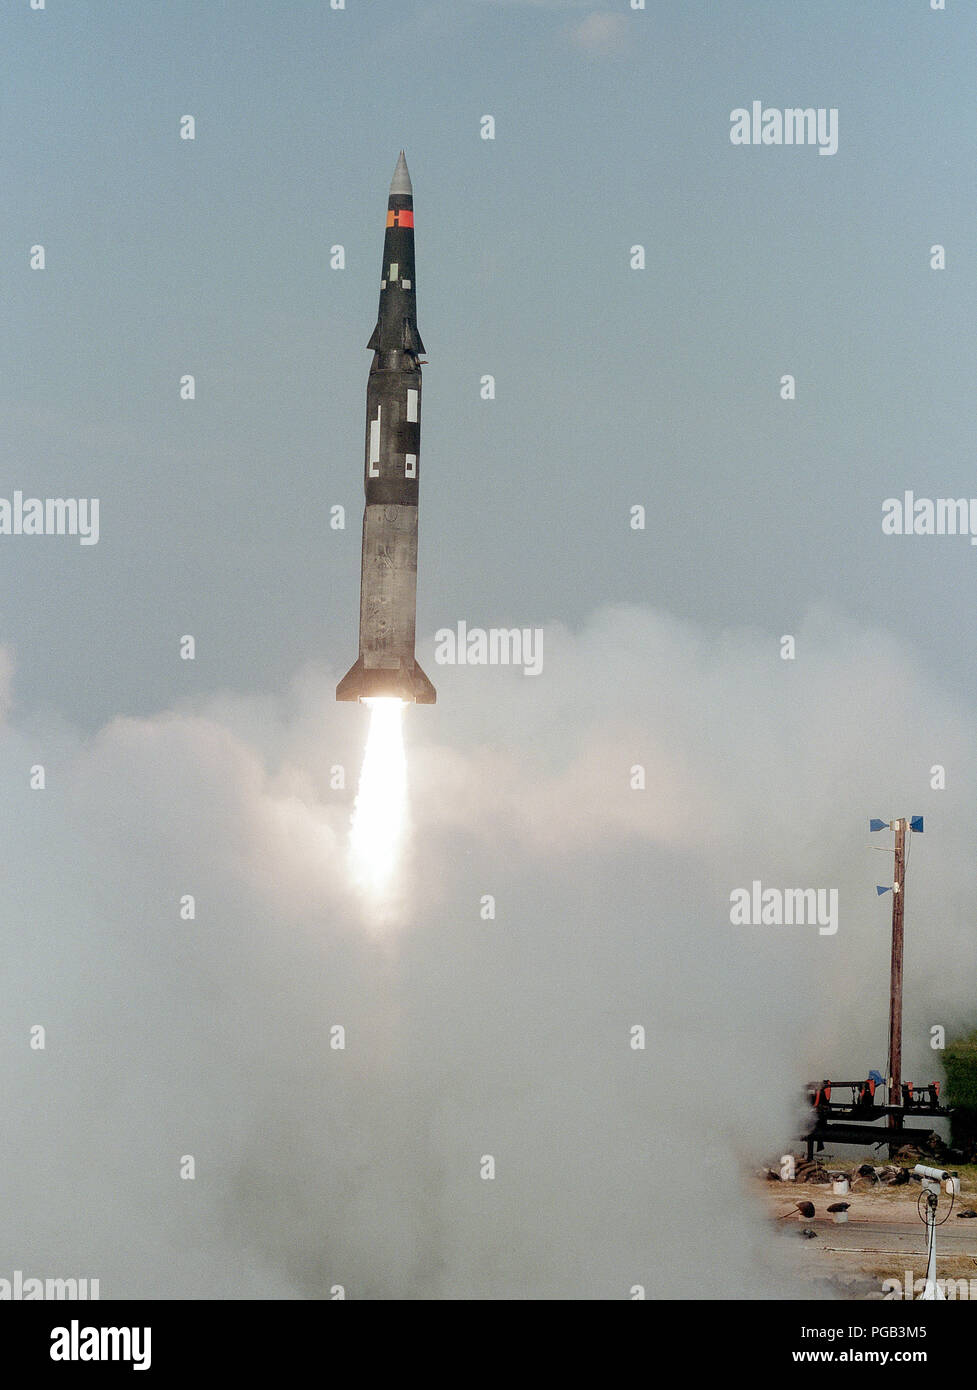 A Pershing II missile is launched from Complex 16. Stock Photo